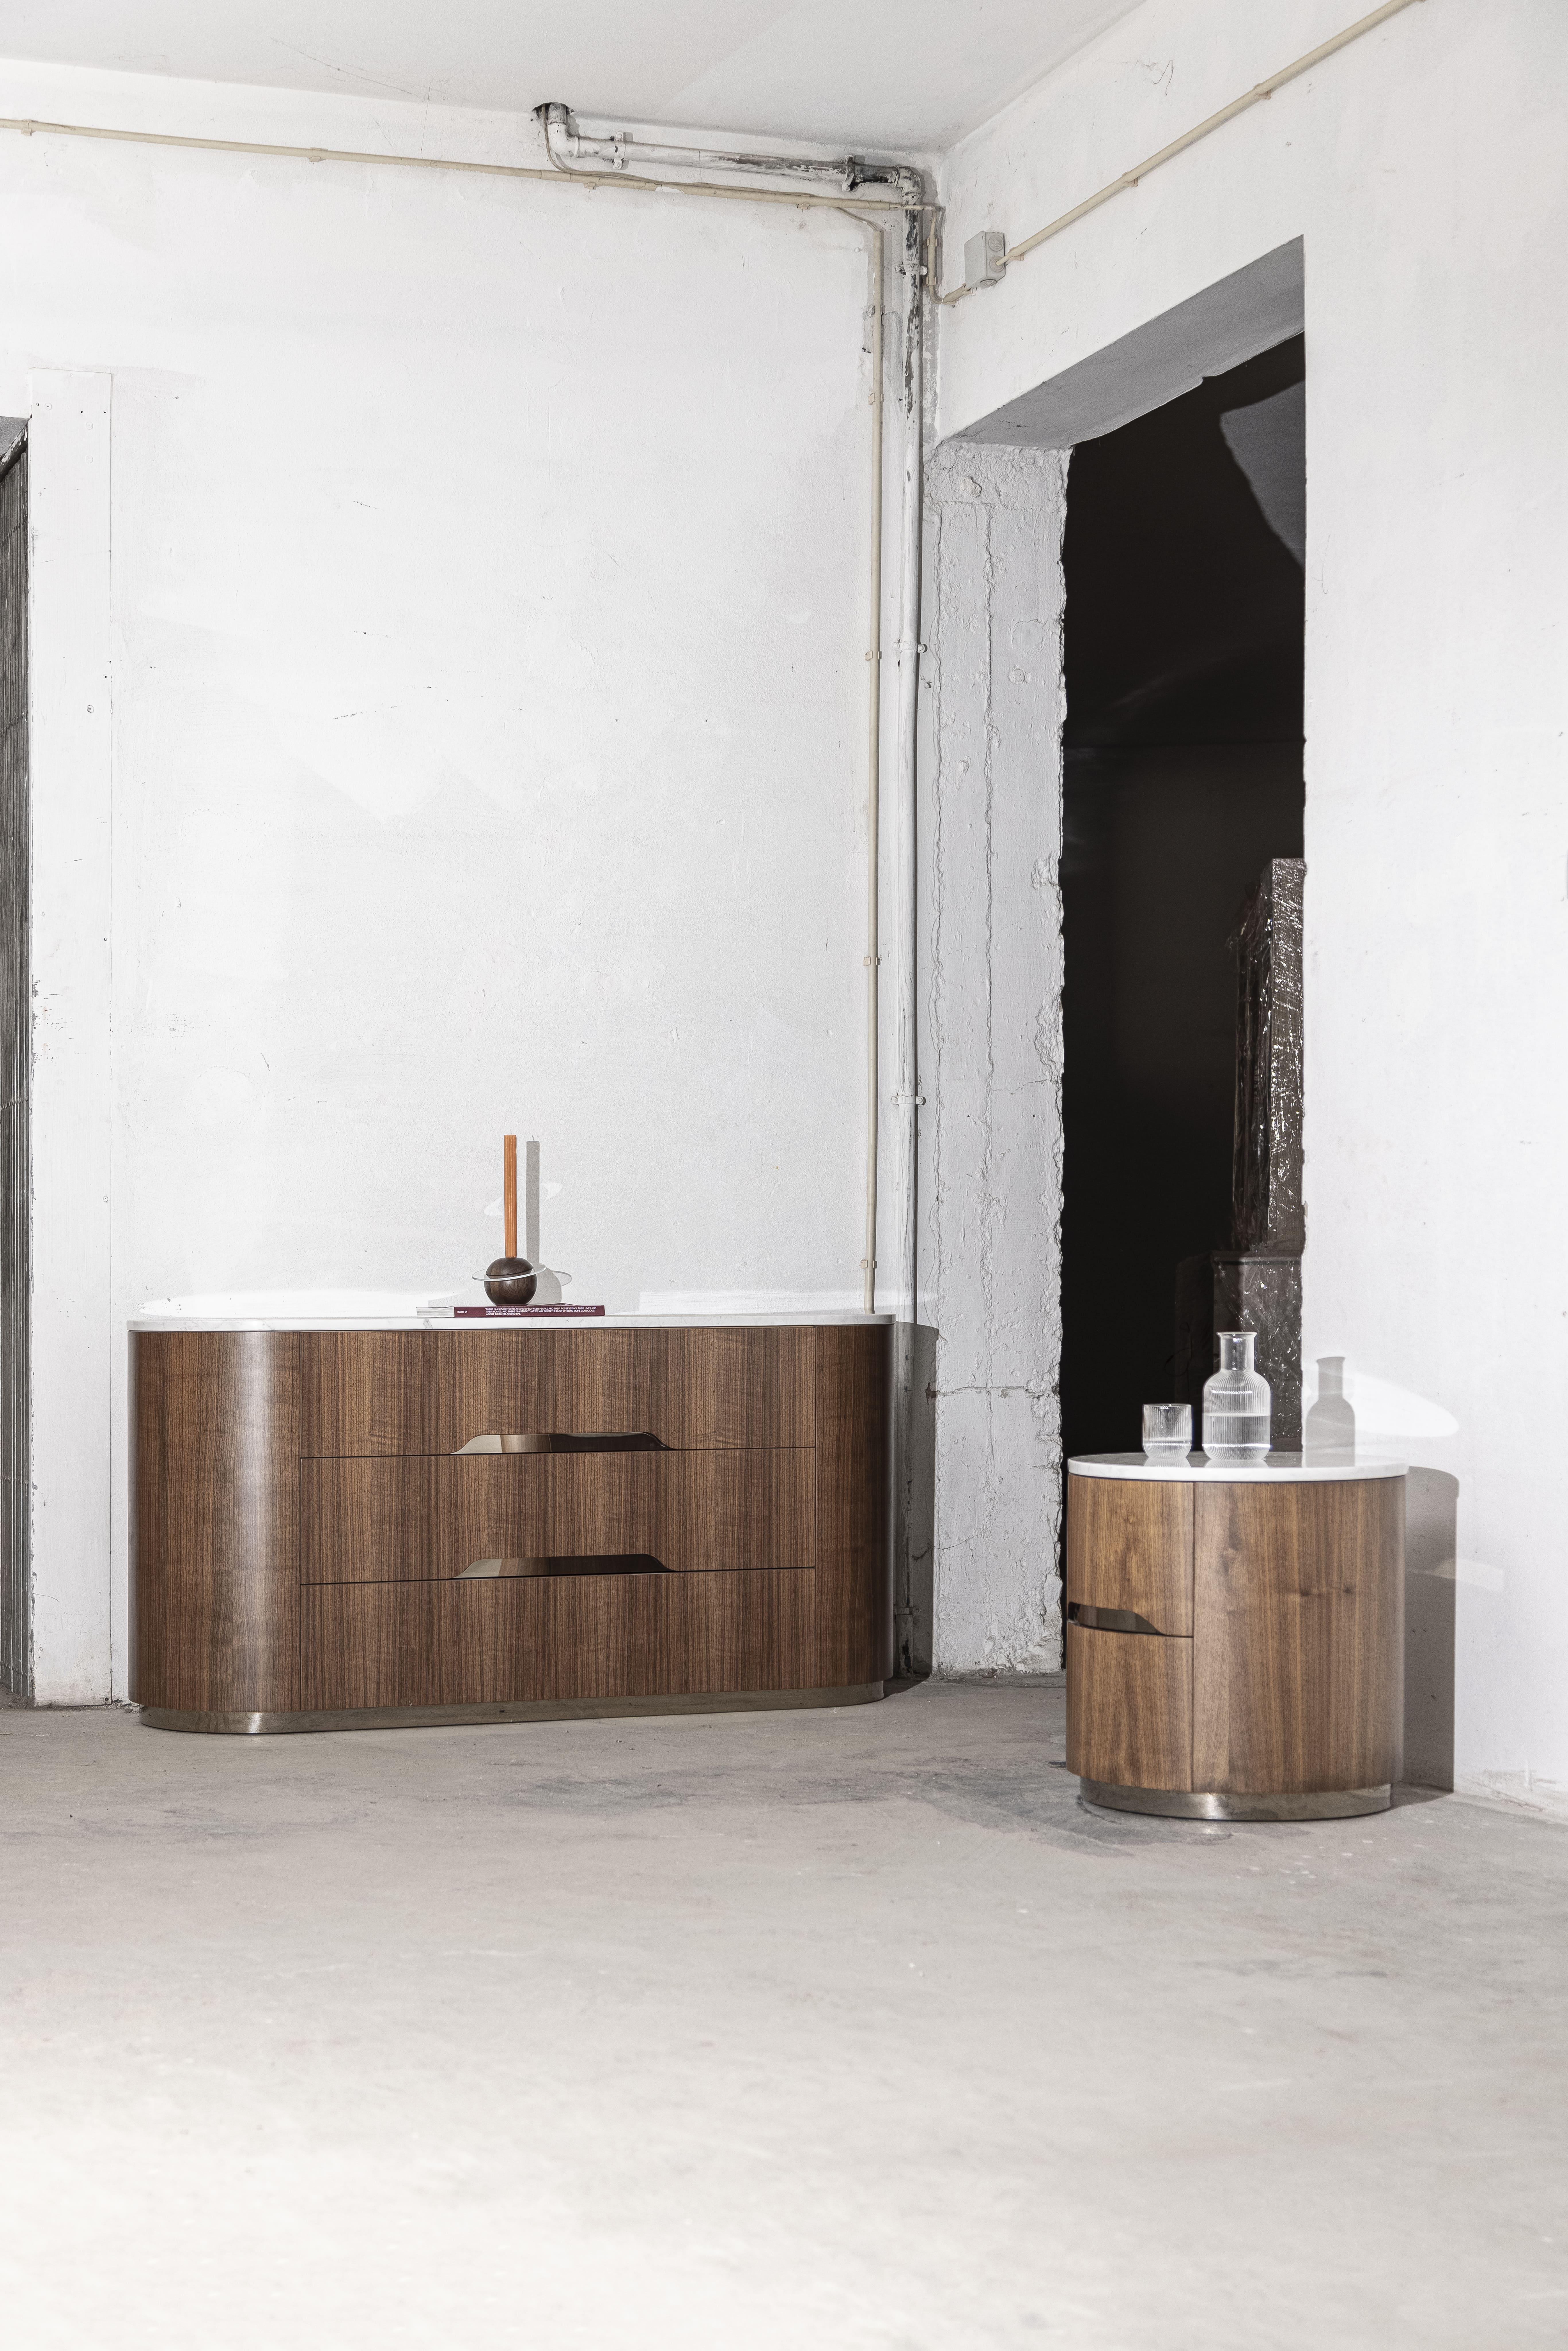 SMOOTH TALKER is so charming, it could convince you to tidy up. With a structure in walnut veneer, its curves and edges are expertly designed to create a visually appealing silhouette. Spacious drawers, that effortlessly glide open and shut, provide